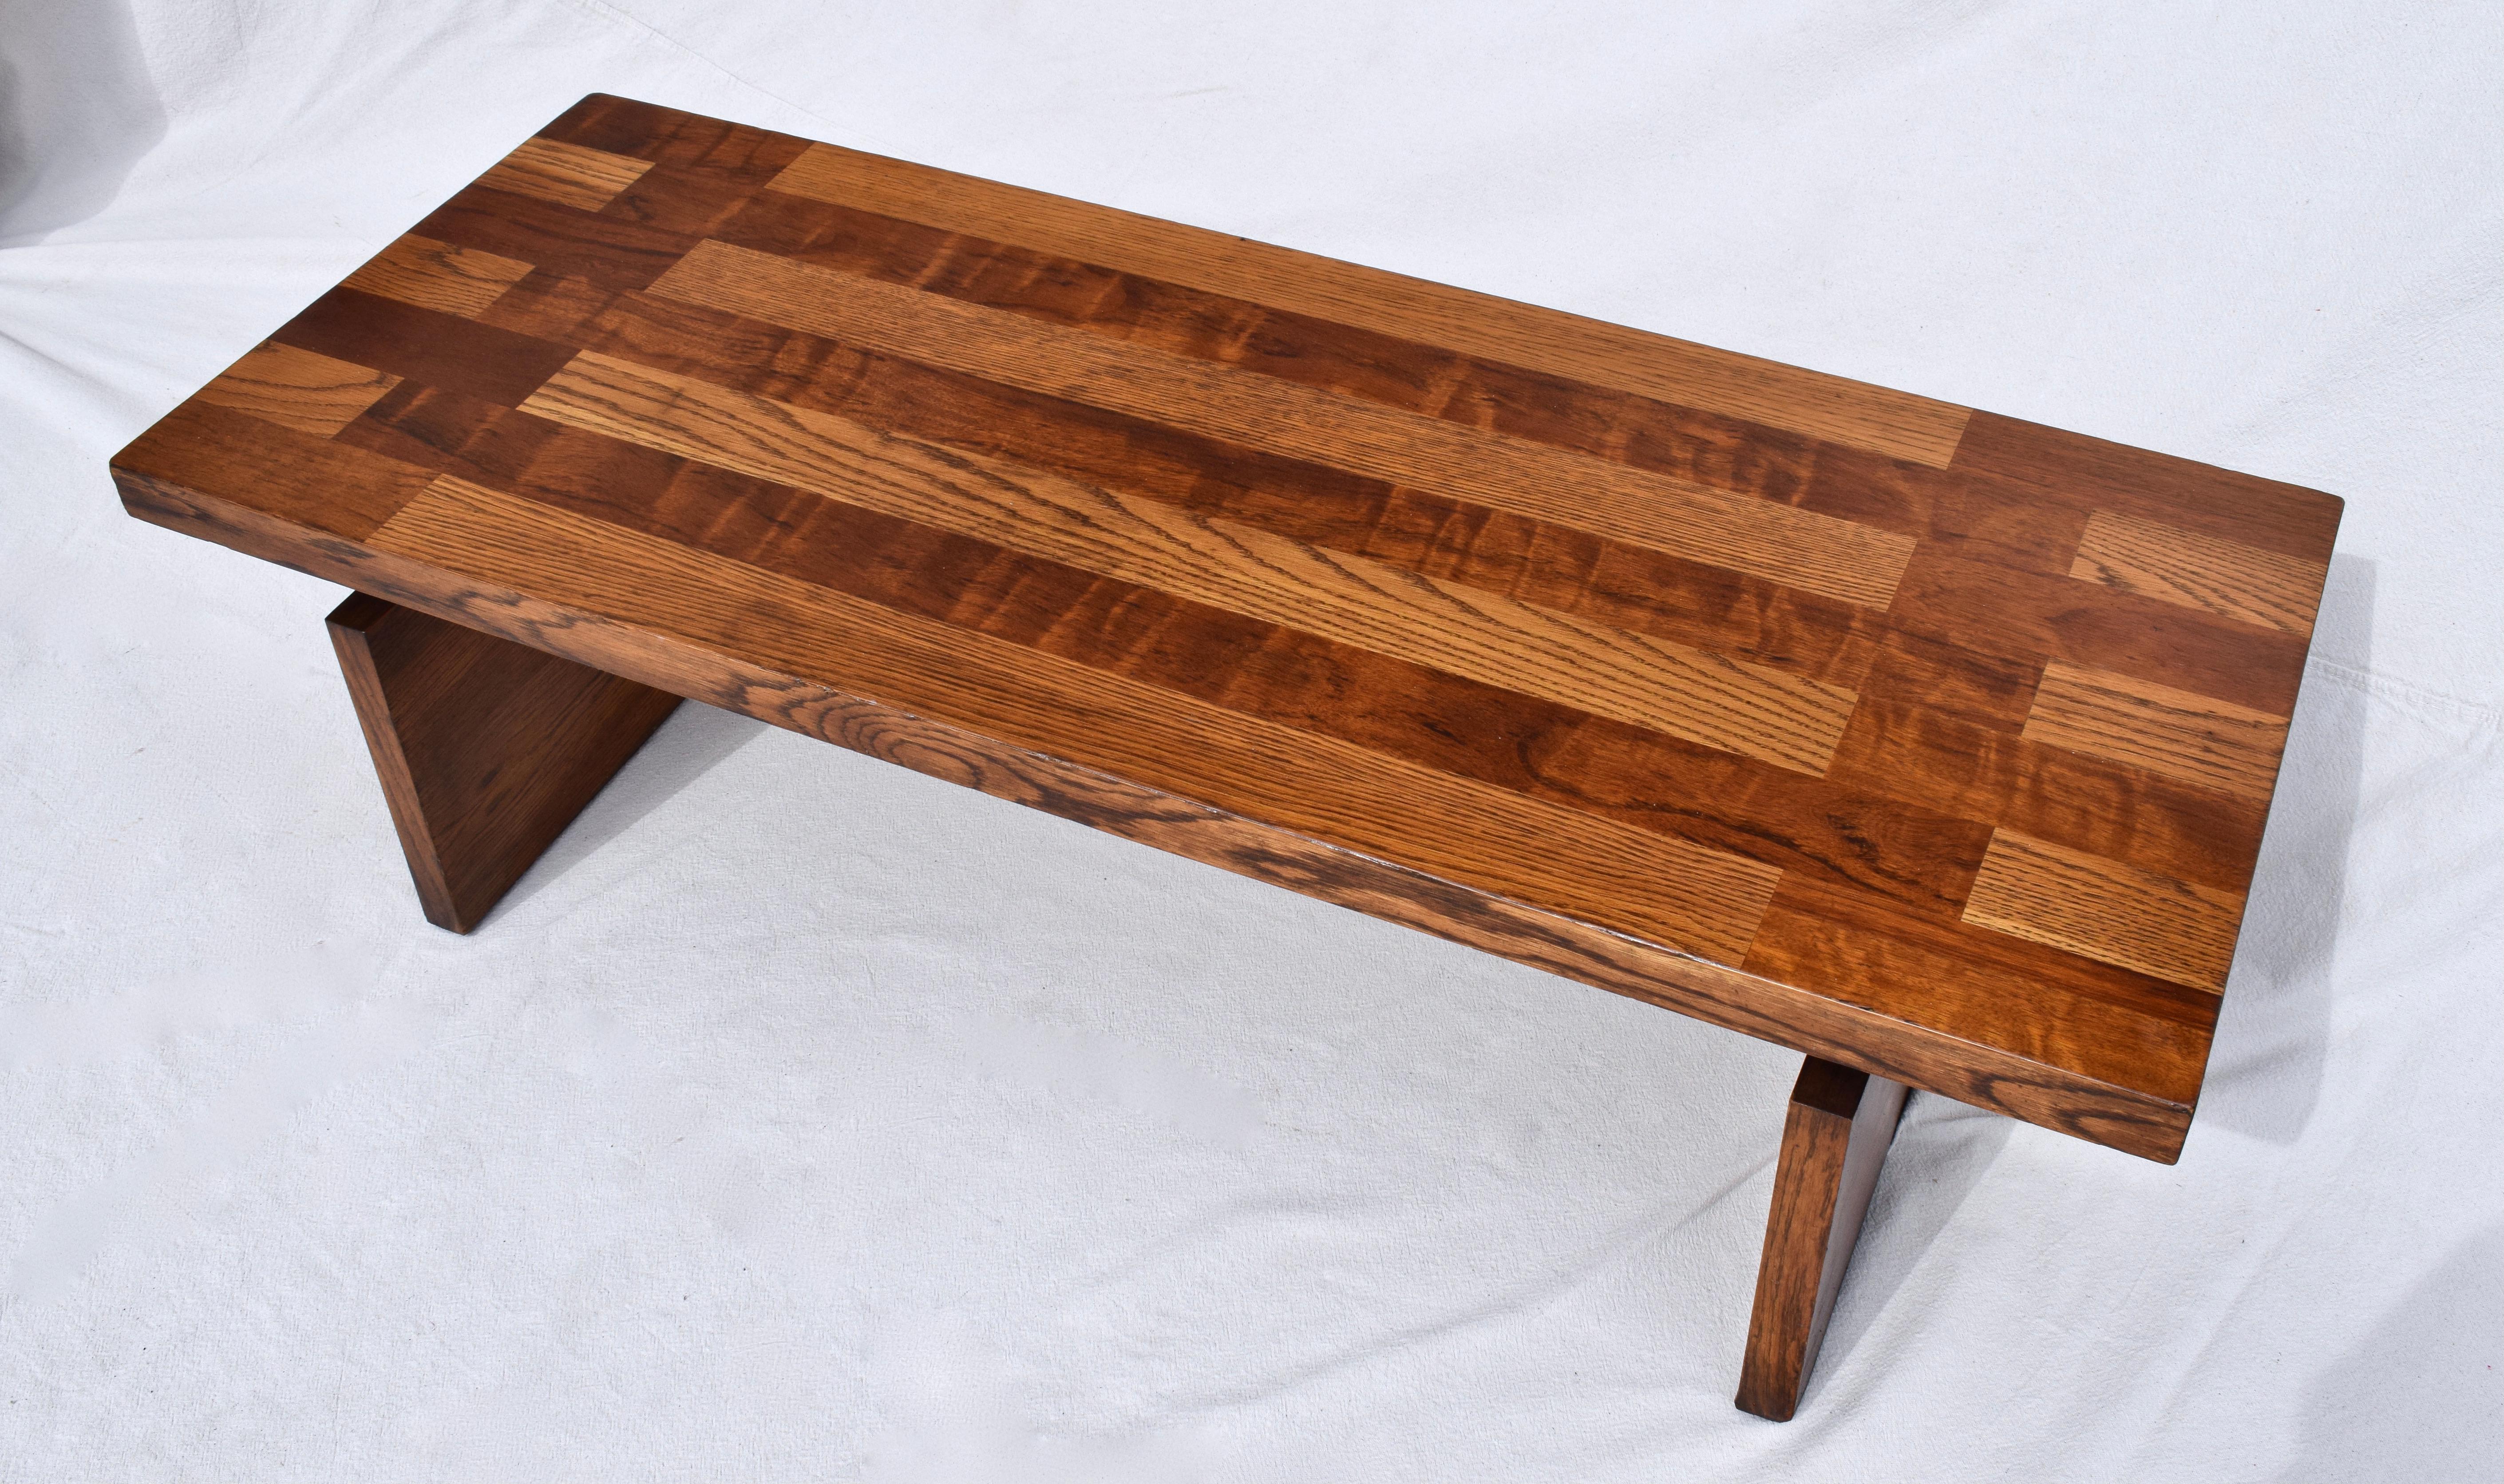 Oak Arts & Crafts Inspired Coffee Cocktail Table by Lane